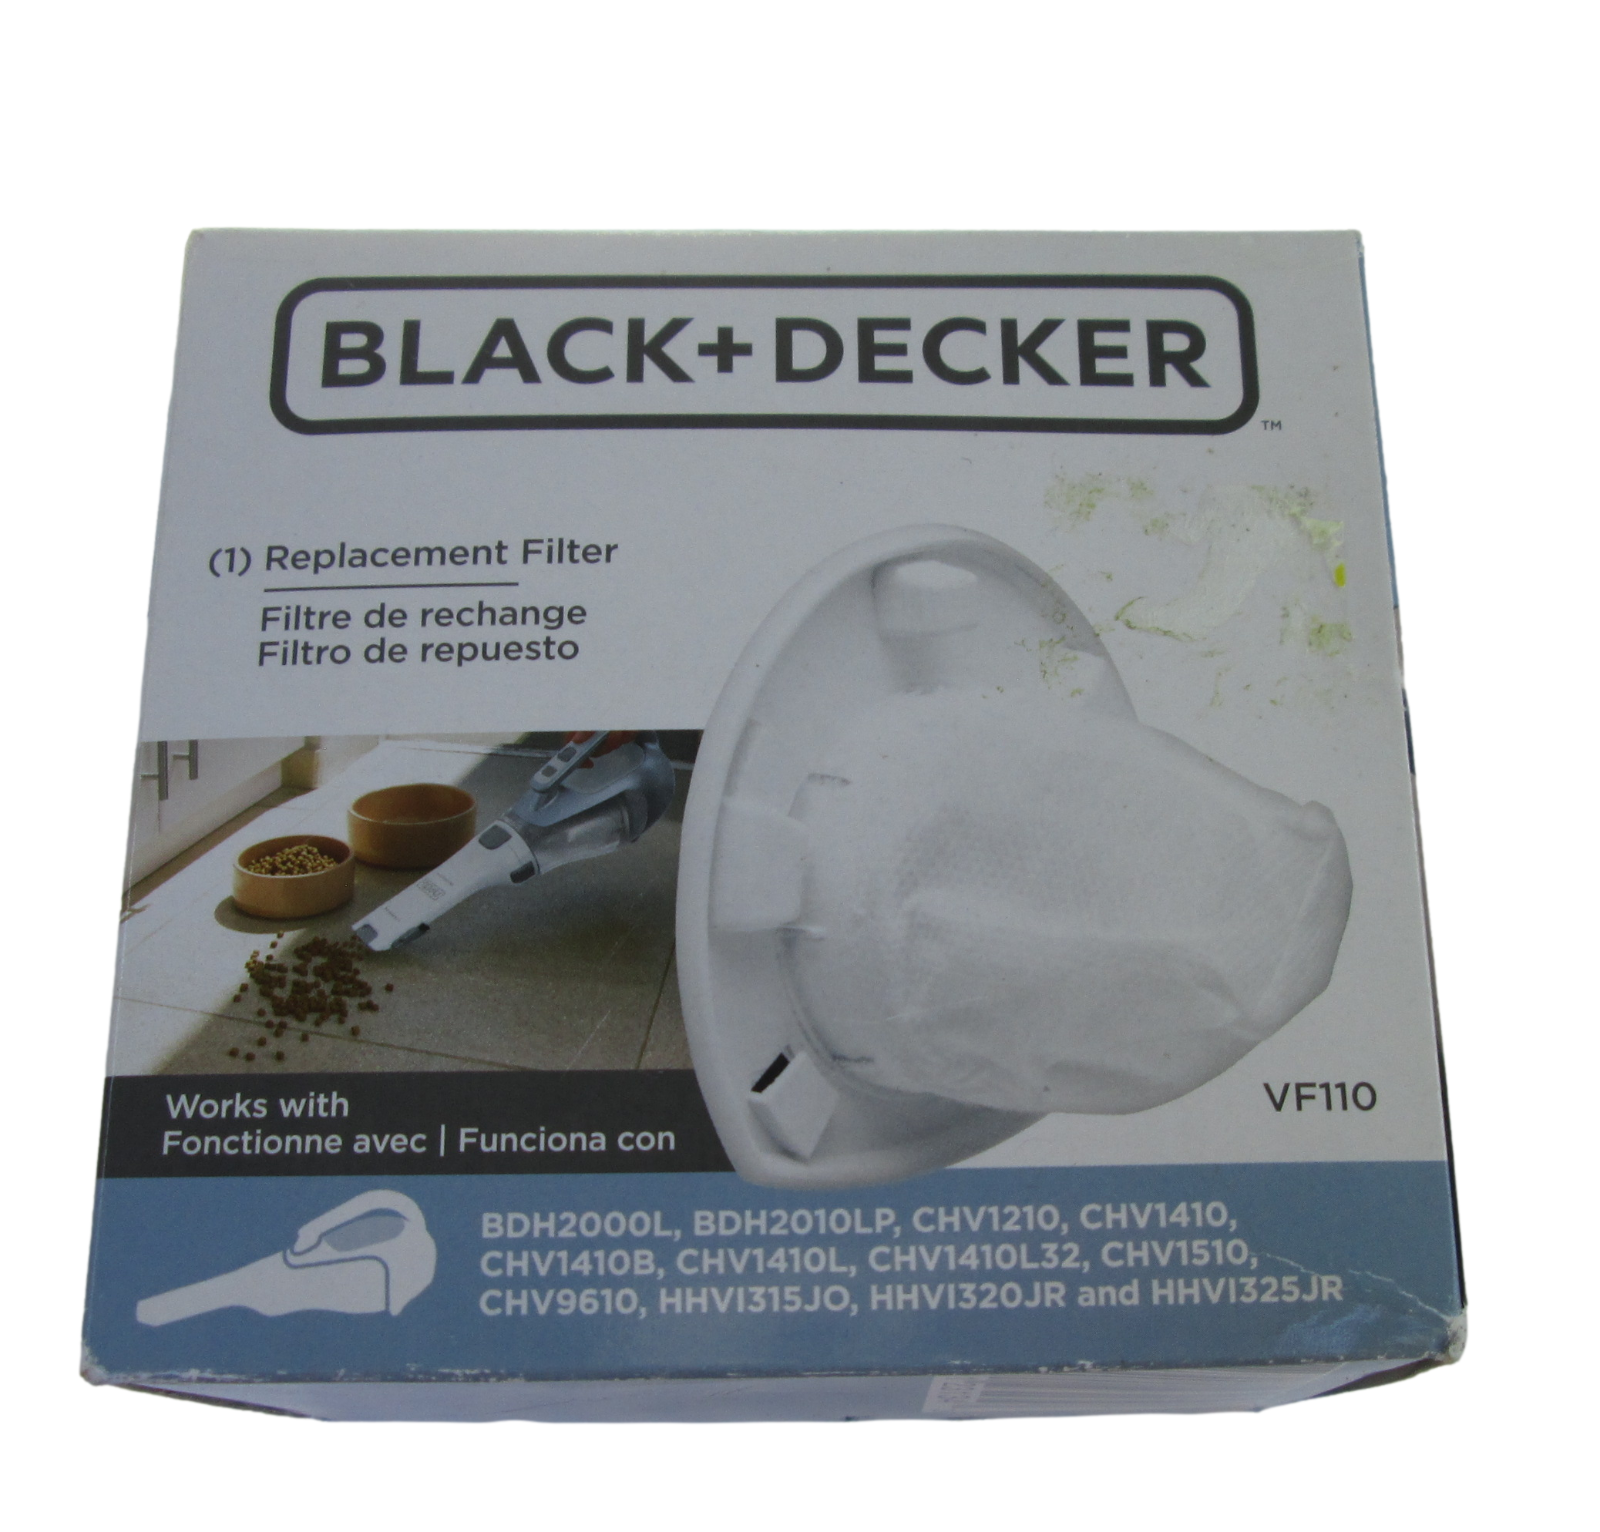 Black + Decker Vacuum Filter Replacement Dustbuster Lithium Hand Held VF110 - $9.89